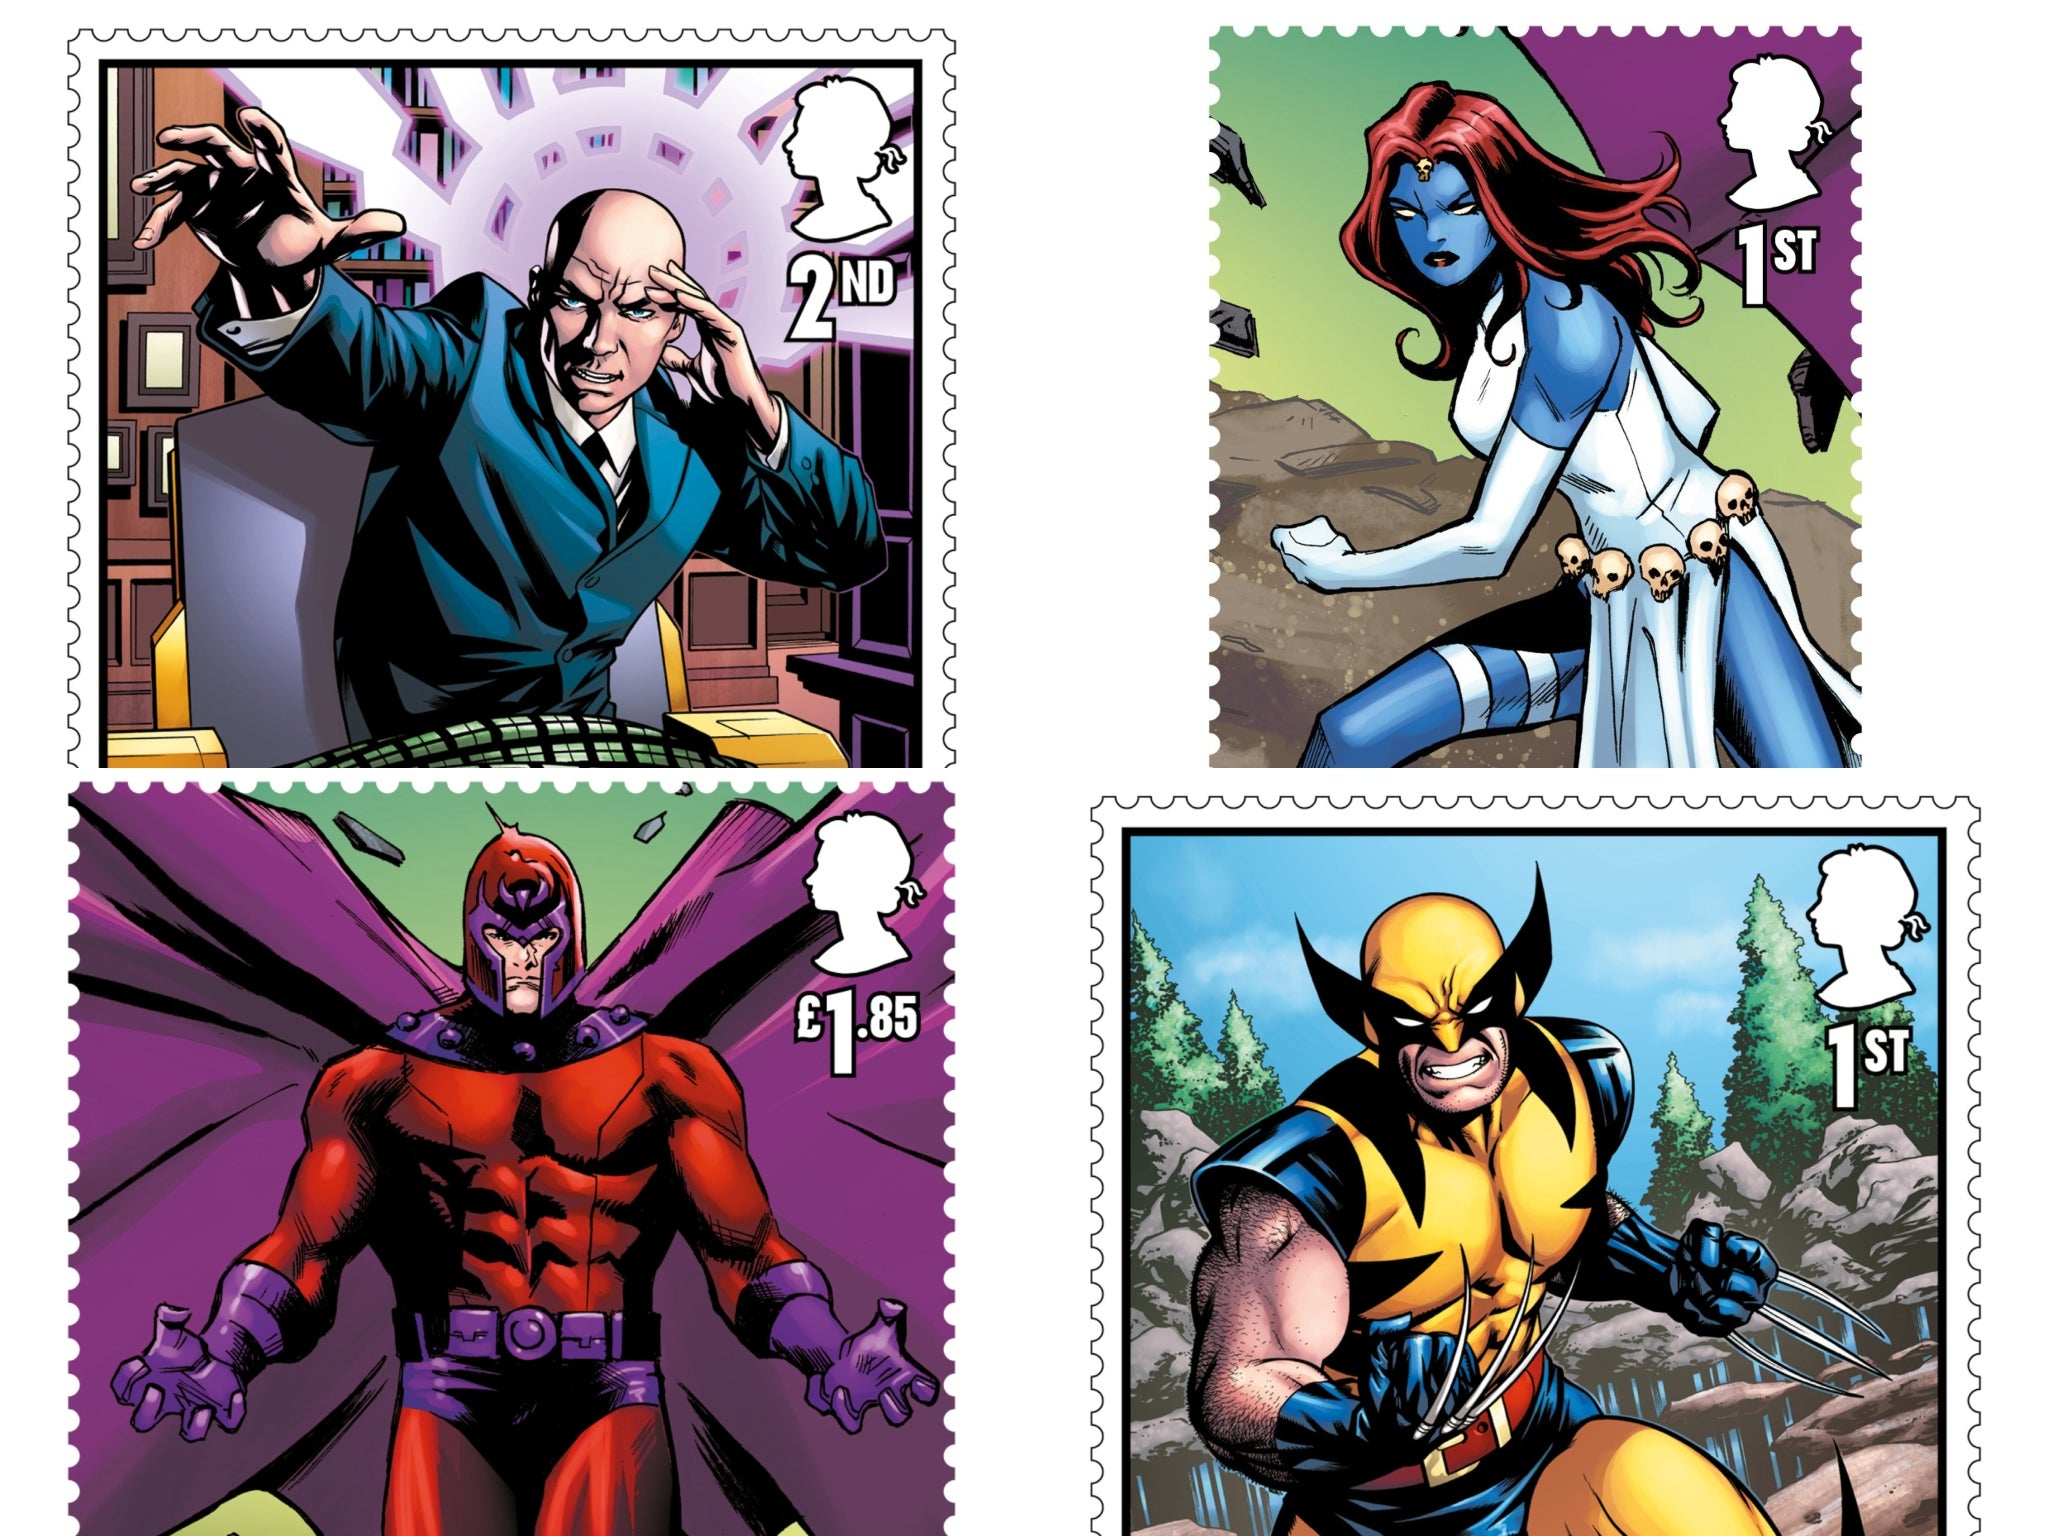 Royal Mail unveils stamp collection to mark 60th anniversary of X-Men franchise